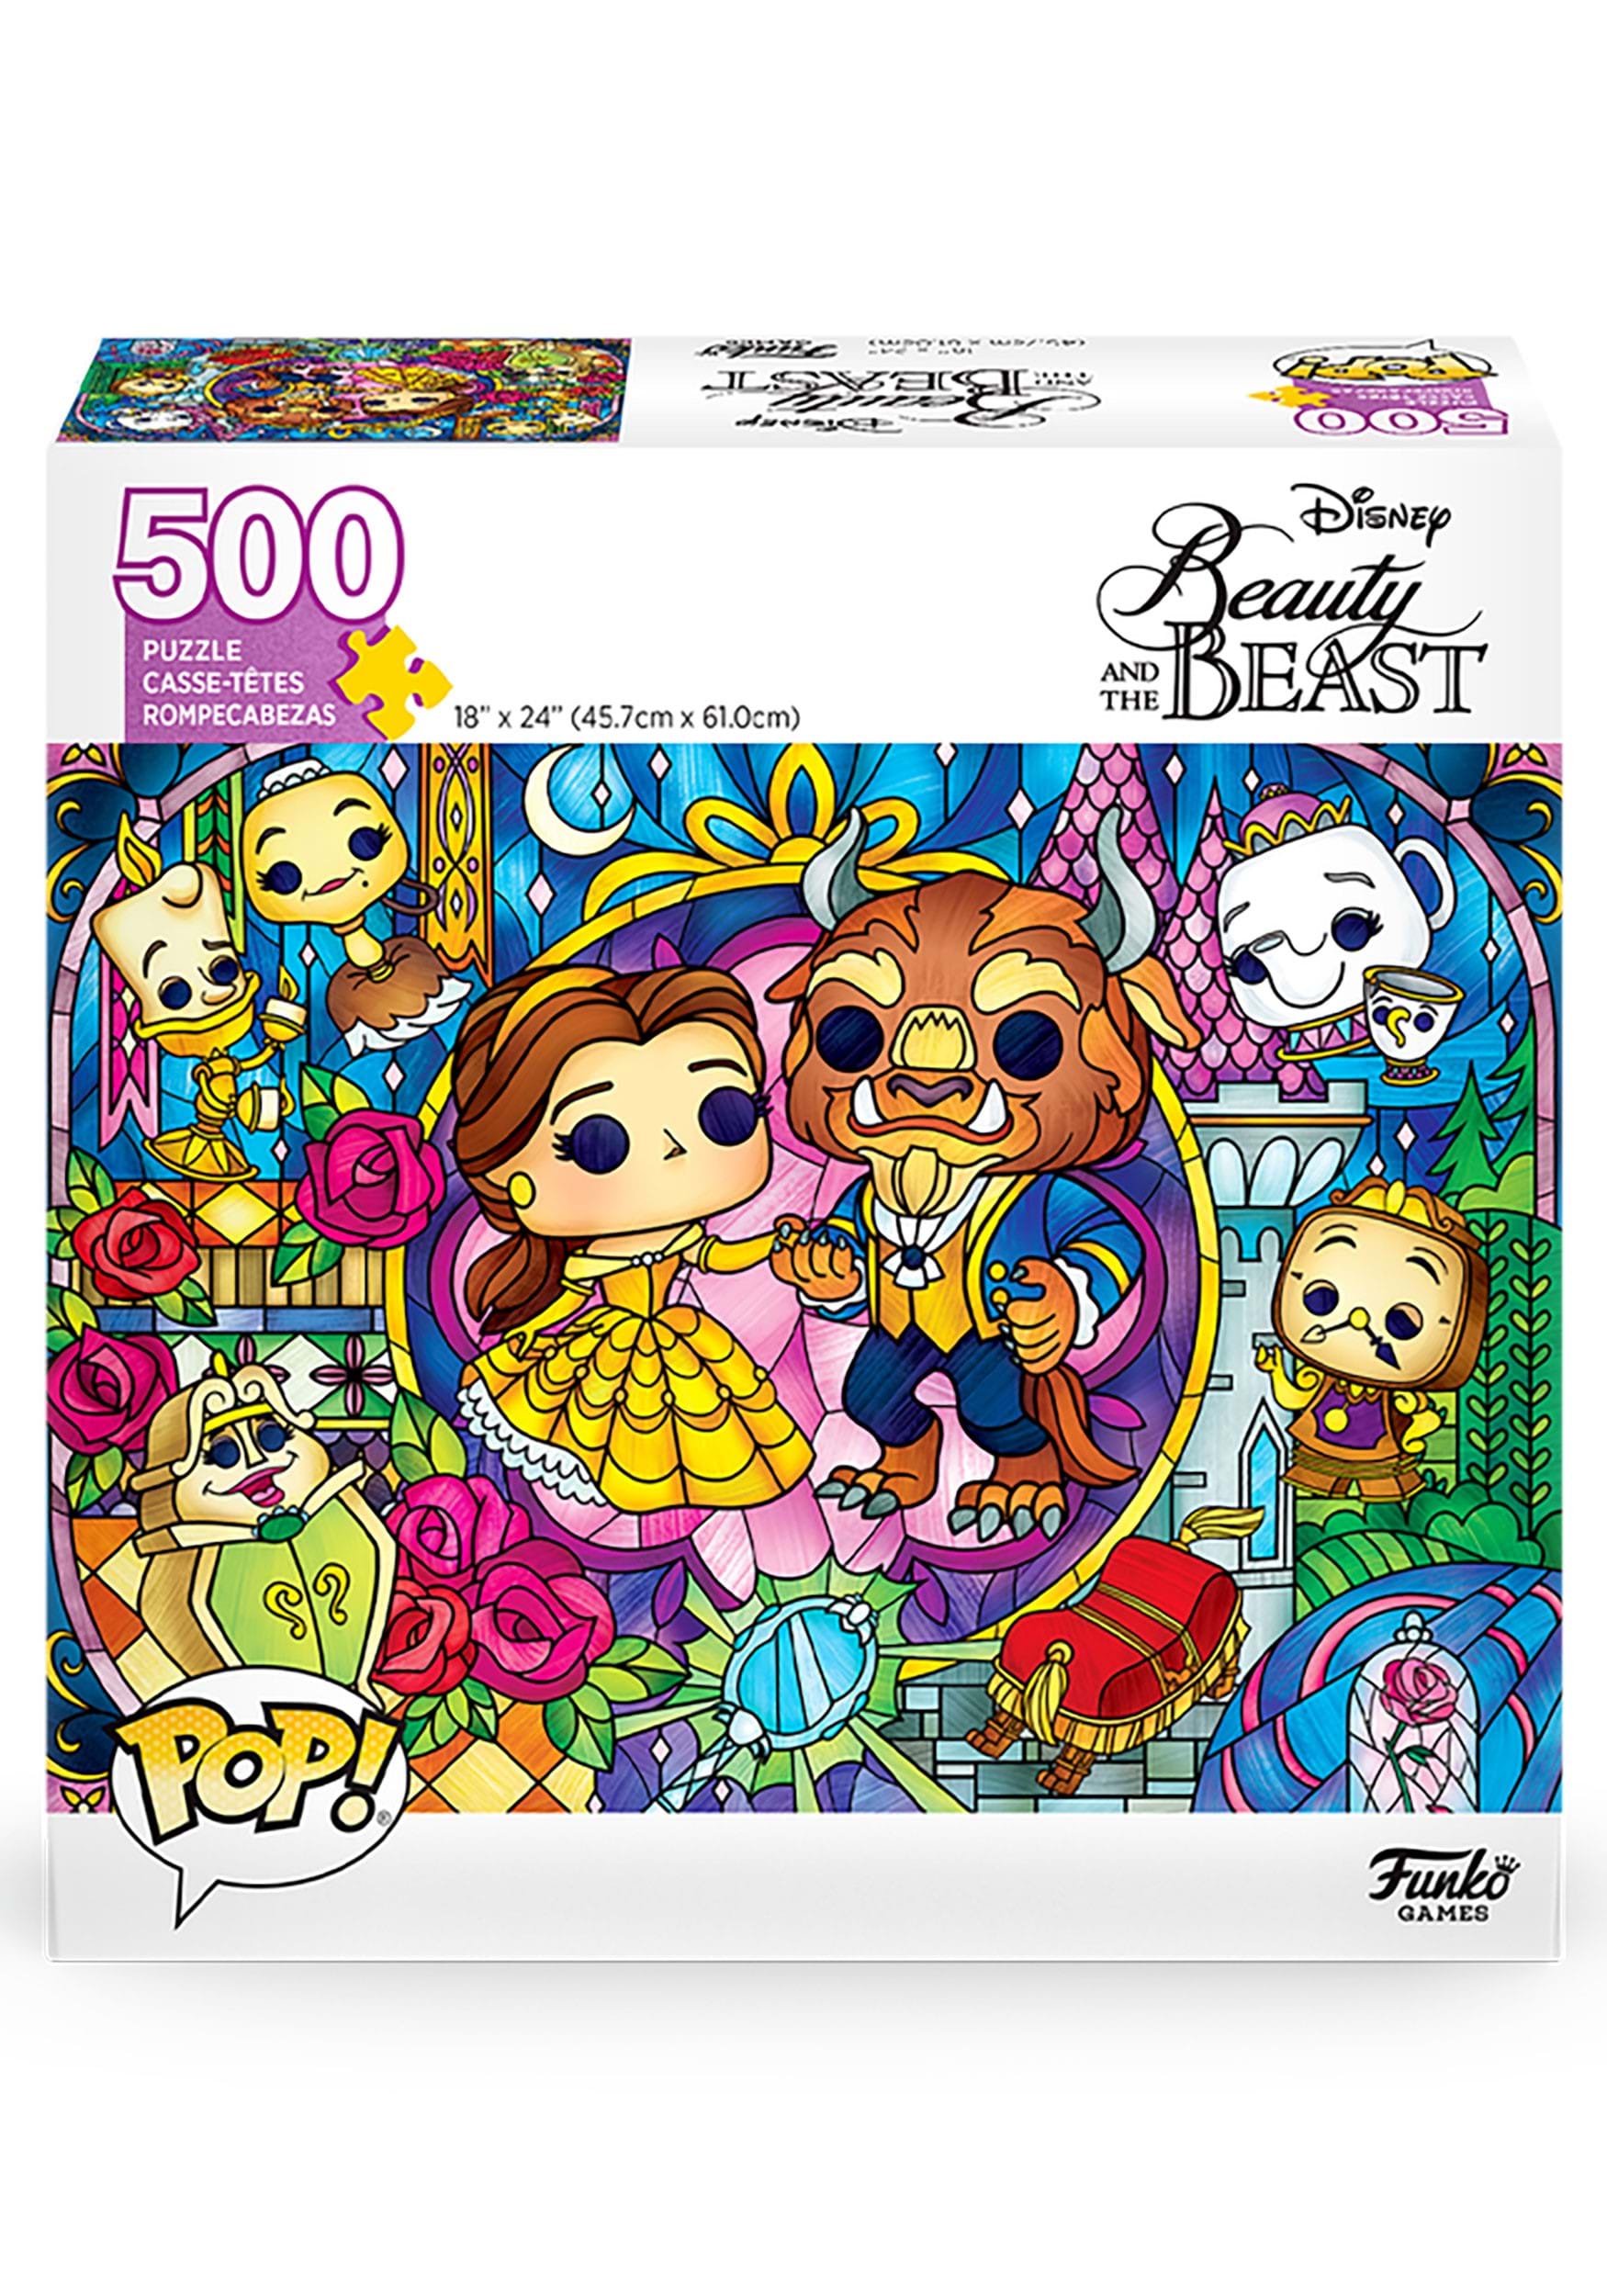 Funko POP! Disney Beauty and the Beast 500 Piece Puzzle